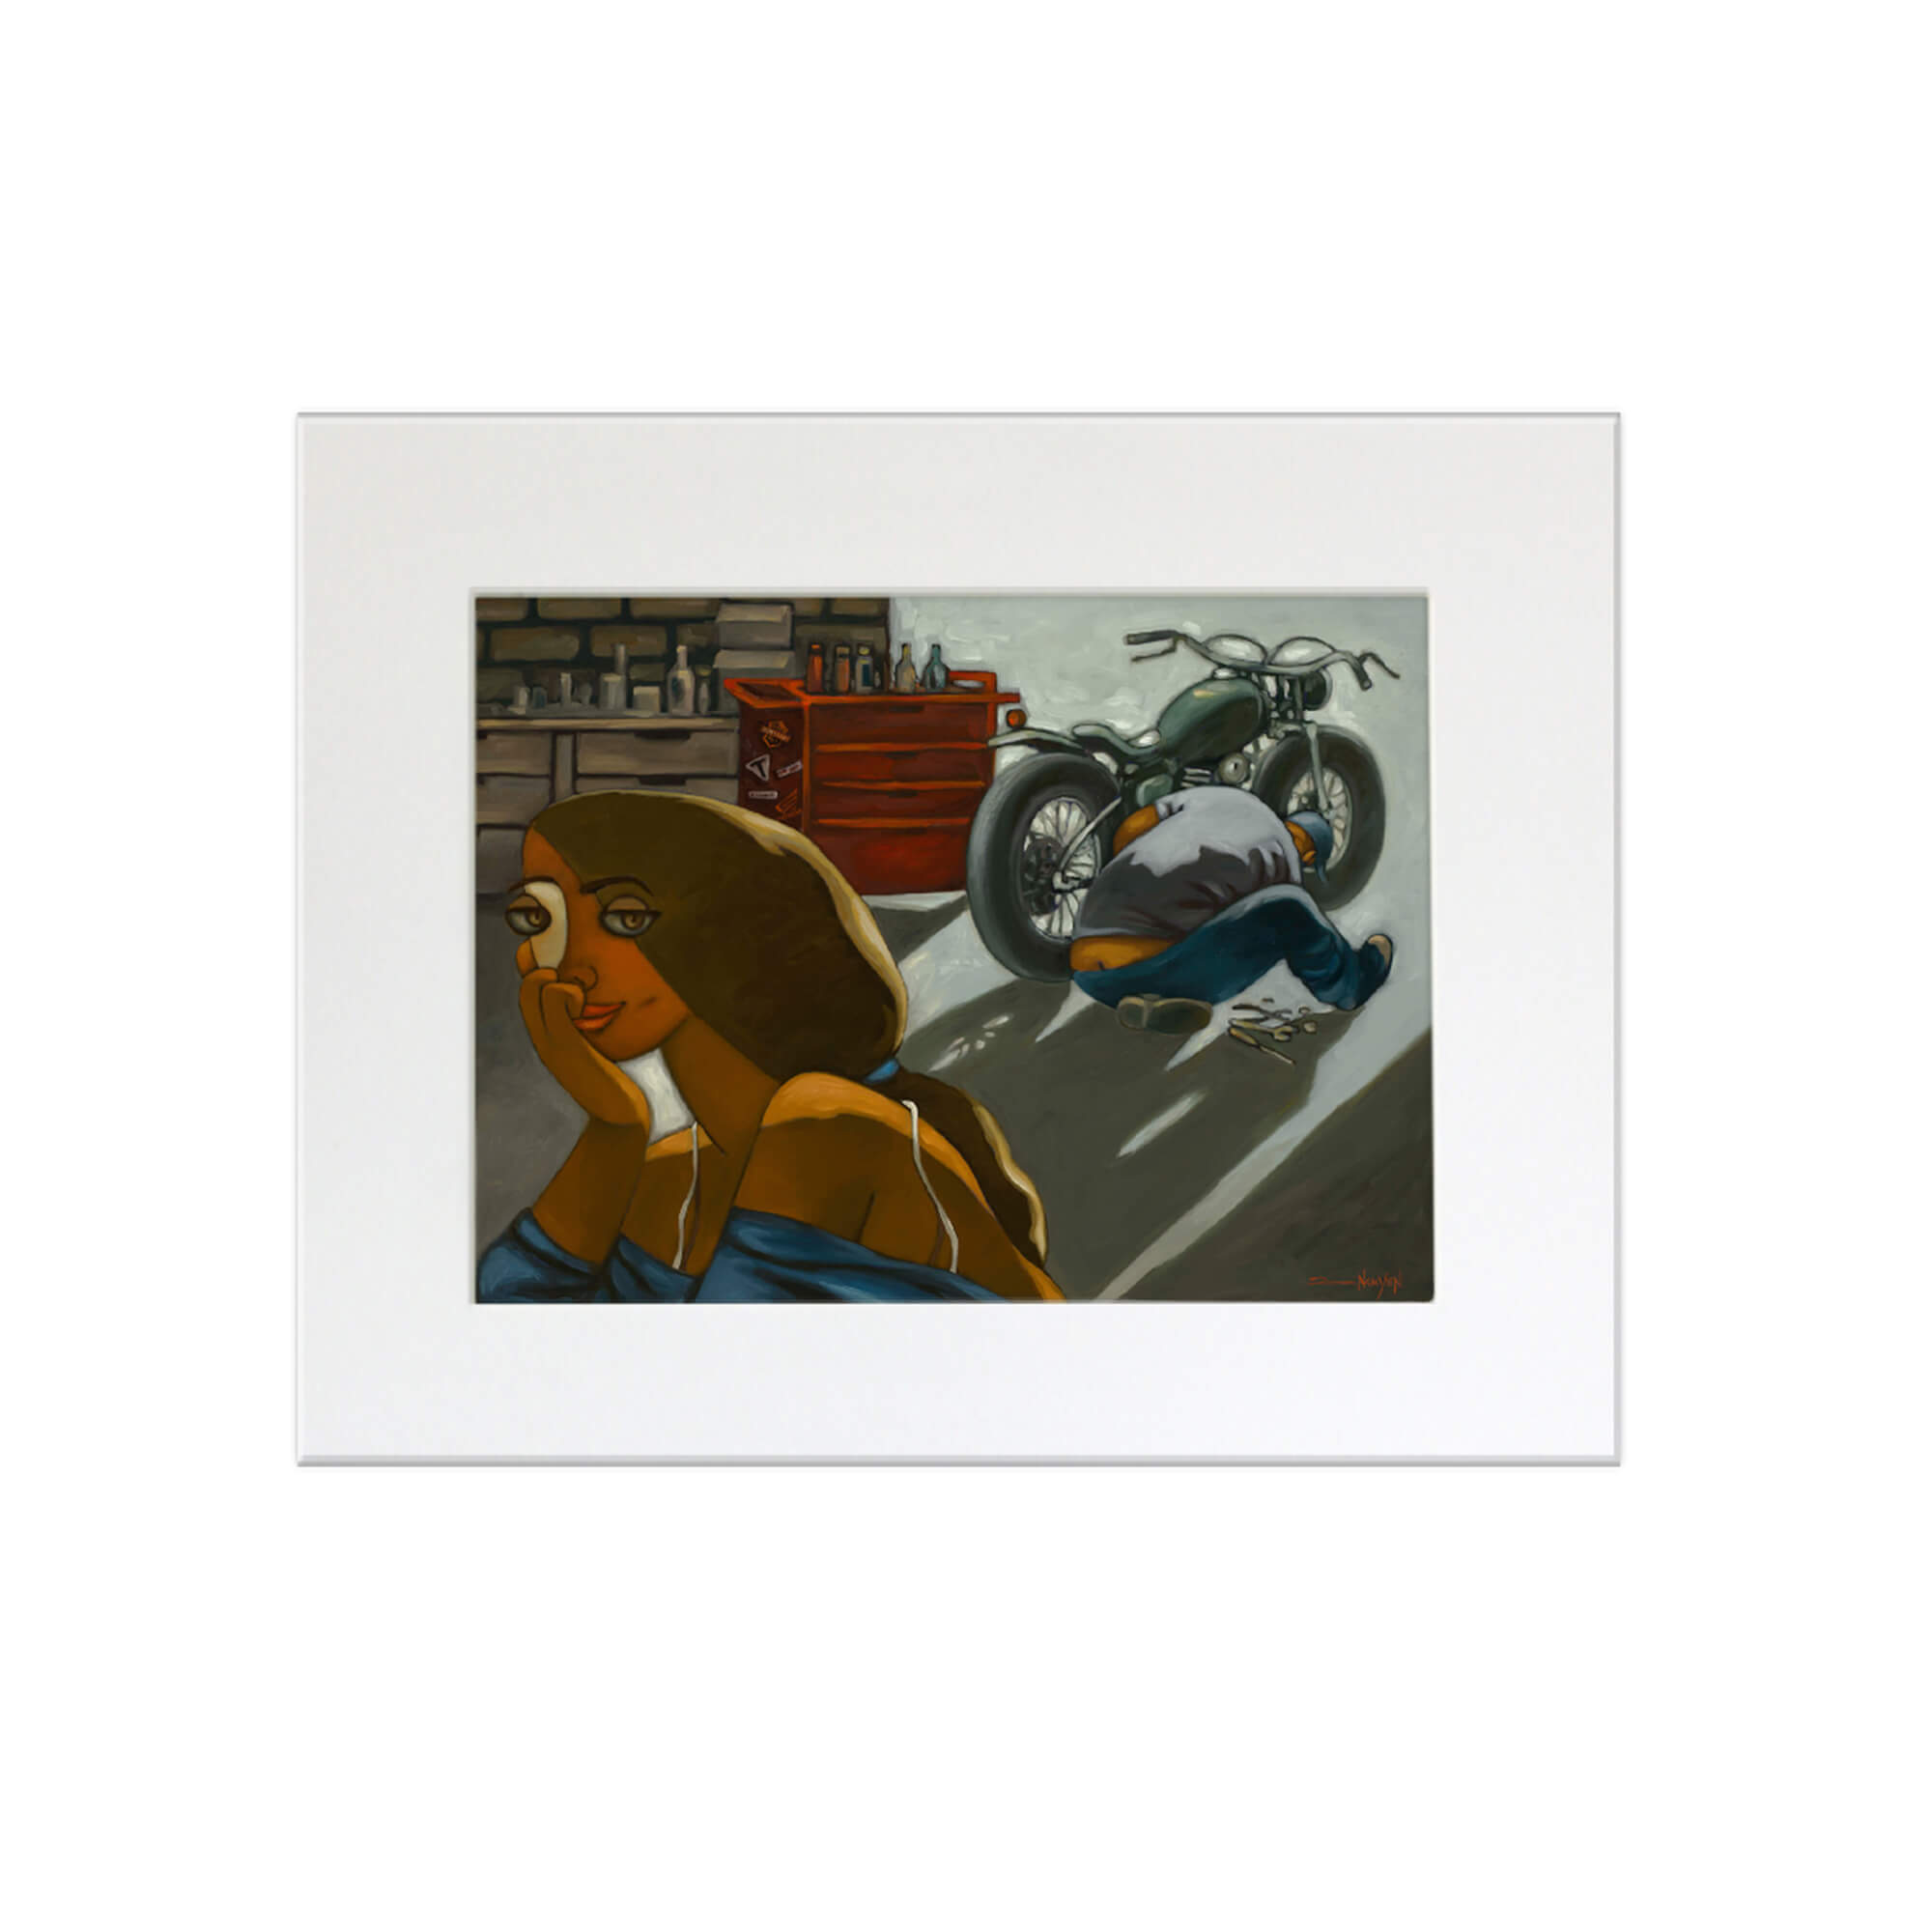 A matted art print of a woman and her vintage motorcycle in a mechanic shop by Hawaii artist Tim Nguyen